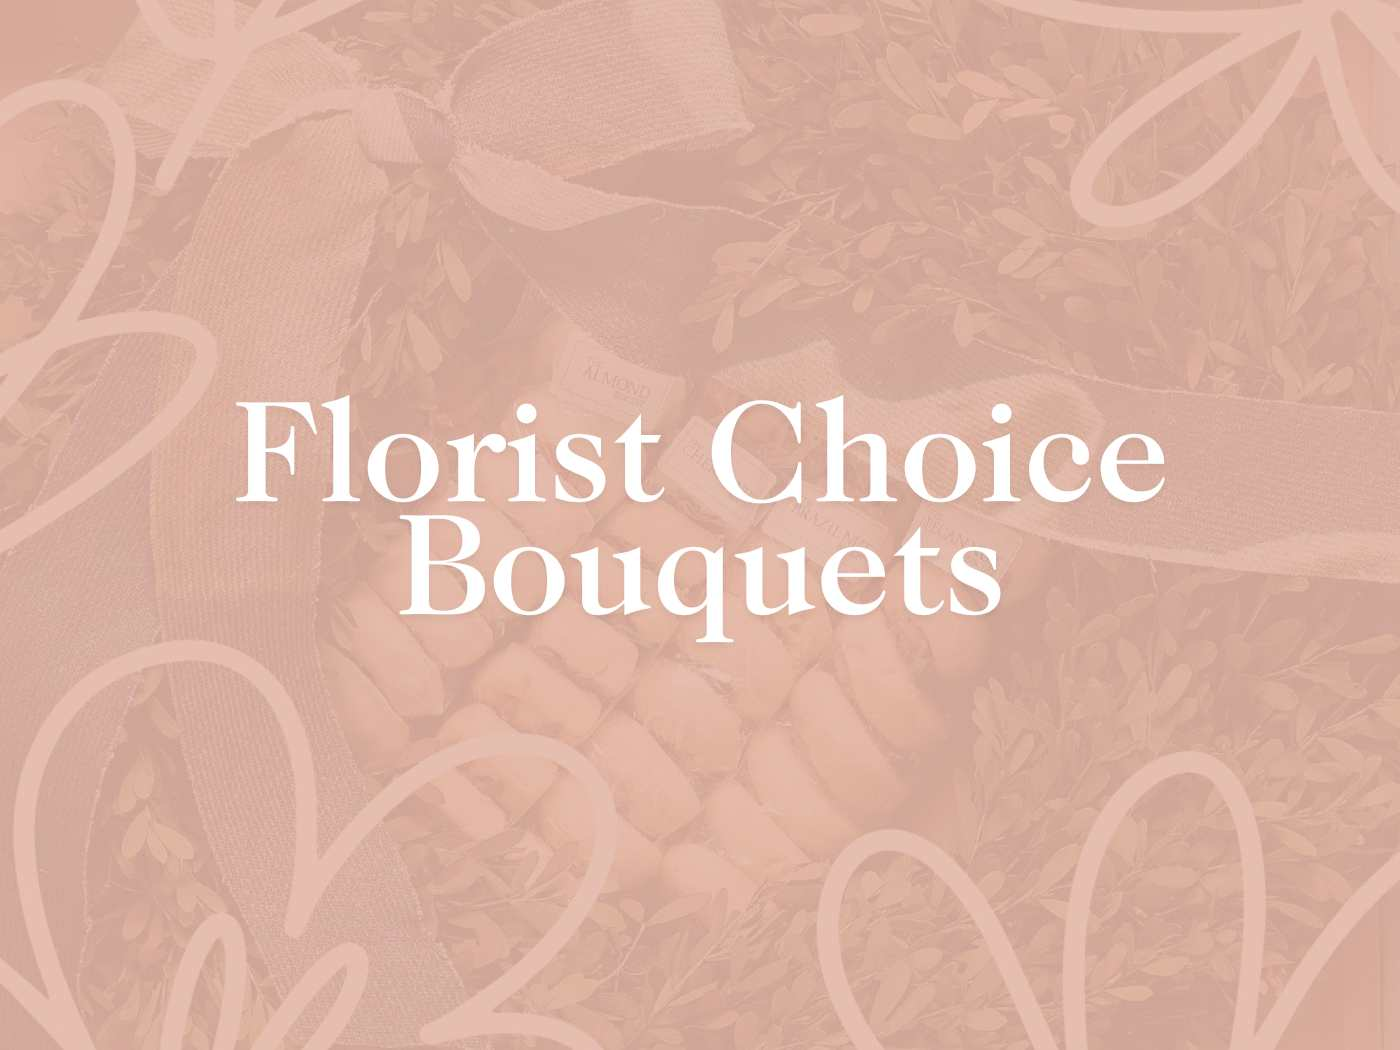 Elegant and soft-toned promotional image for Florist Choice Bouquets Collection, featuring stylized hearts and ribbons background, enhancing the theme of sophisticated floral arrangements. Fabulous Flowers and Gifts.